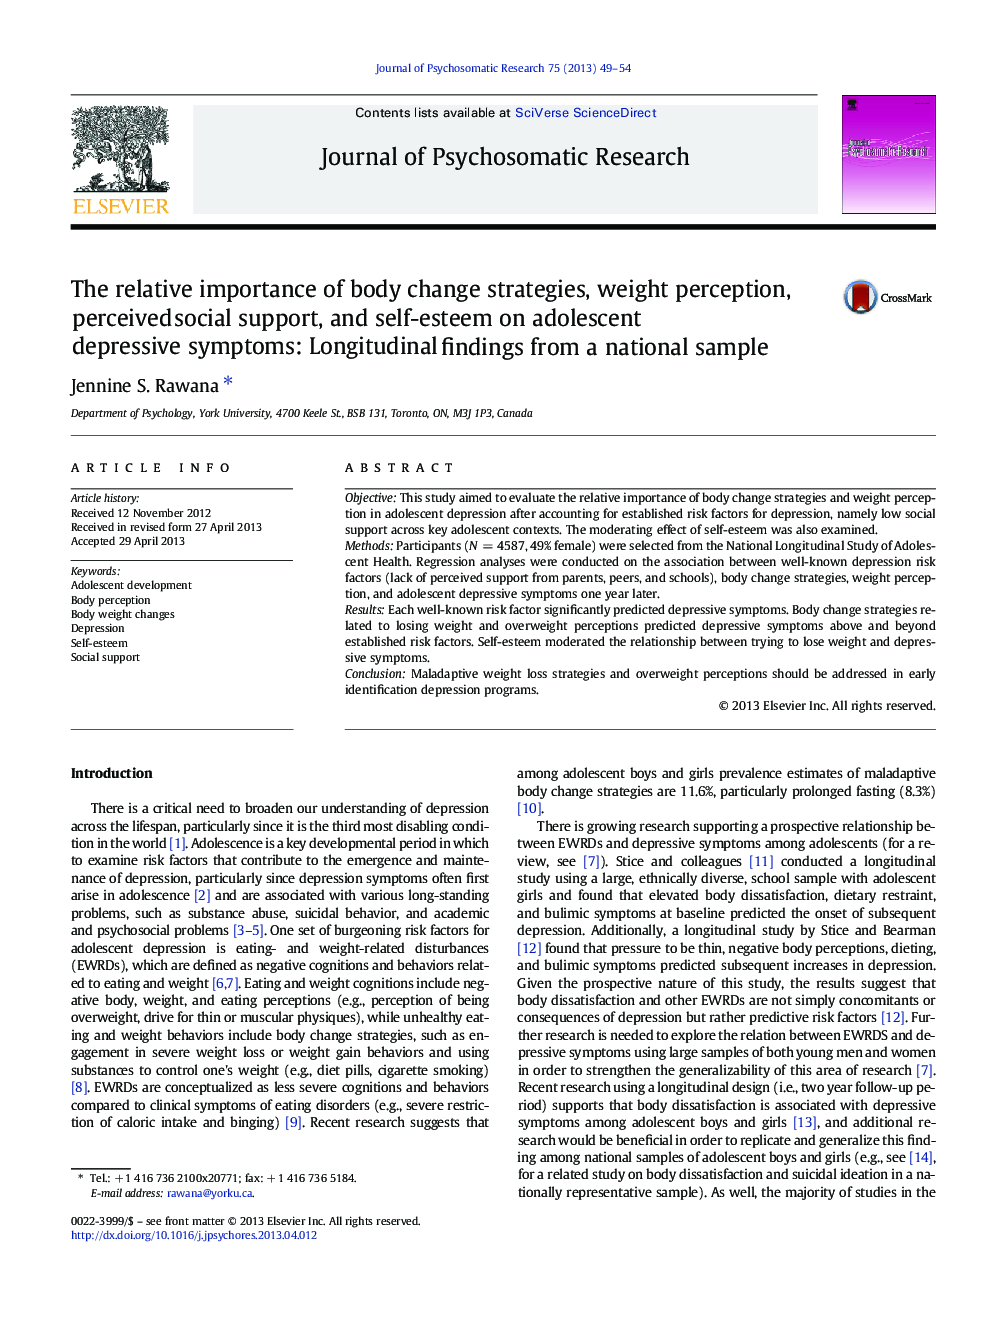 The relative importance of body change strategies, weight perception, perceived social support, and self-esteem on adolescent depressive symptoms: Longitudinal findings from a national sample